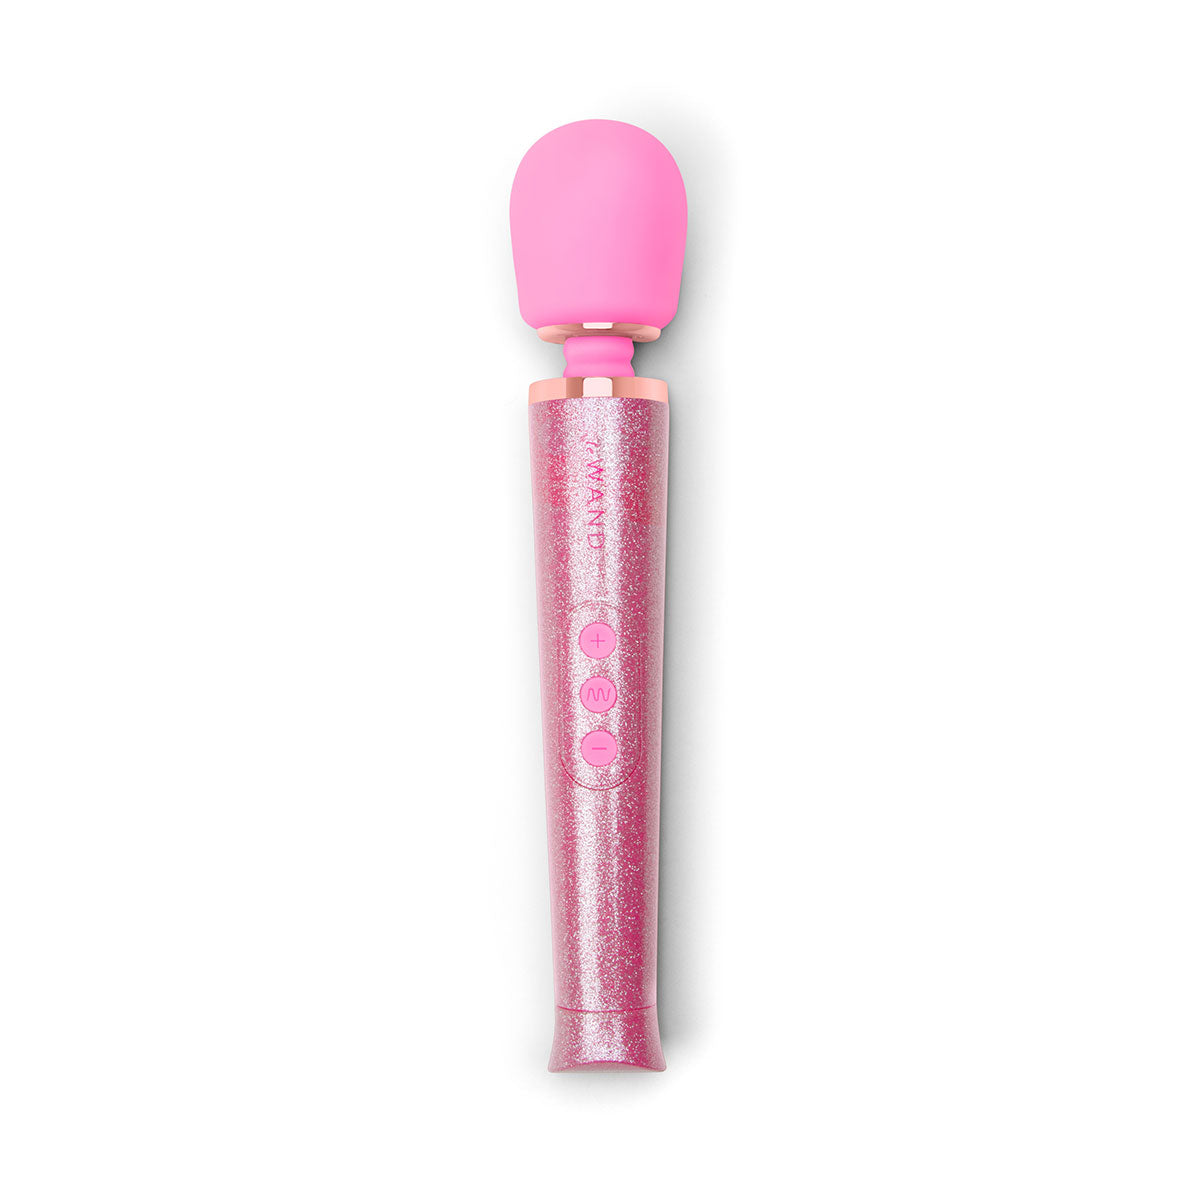 Le Wand Massager - All That Glimmers Pink